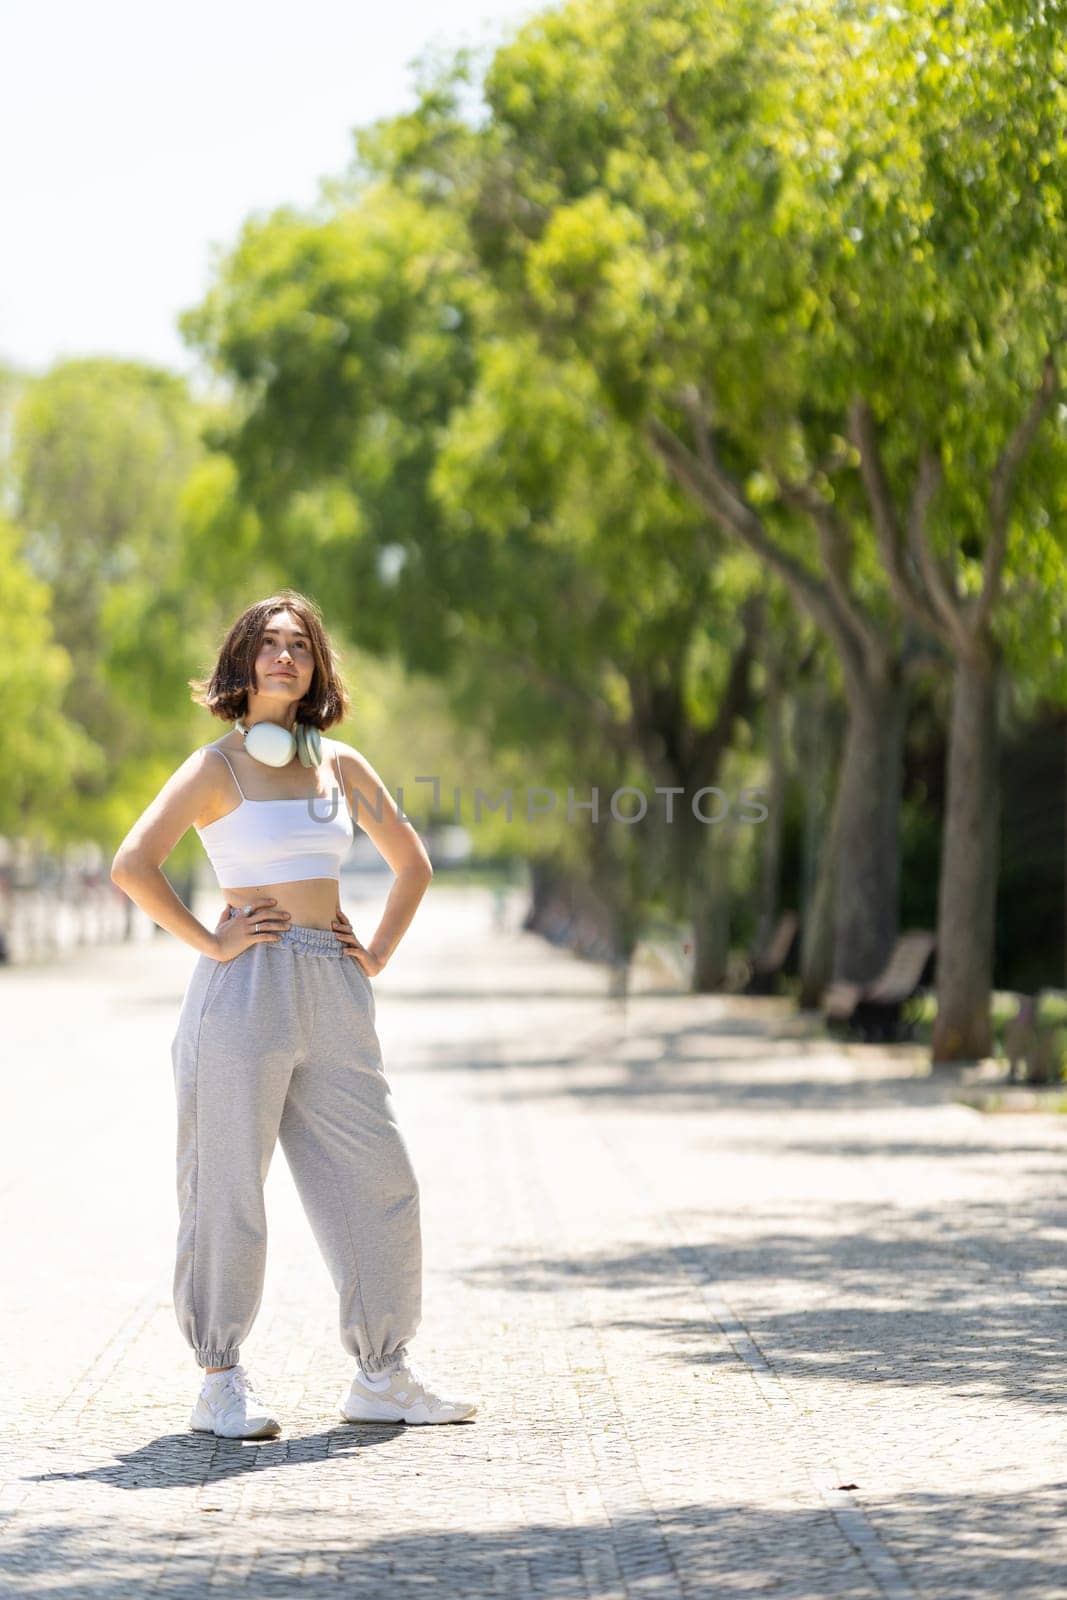 A woman is standing on a sidewalk in front of trees. She is wearing a white tank top and gray pants